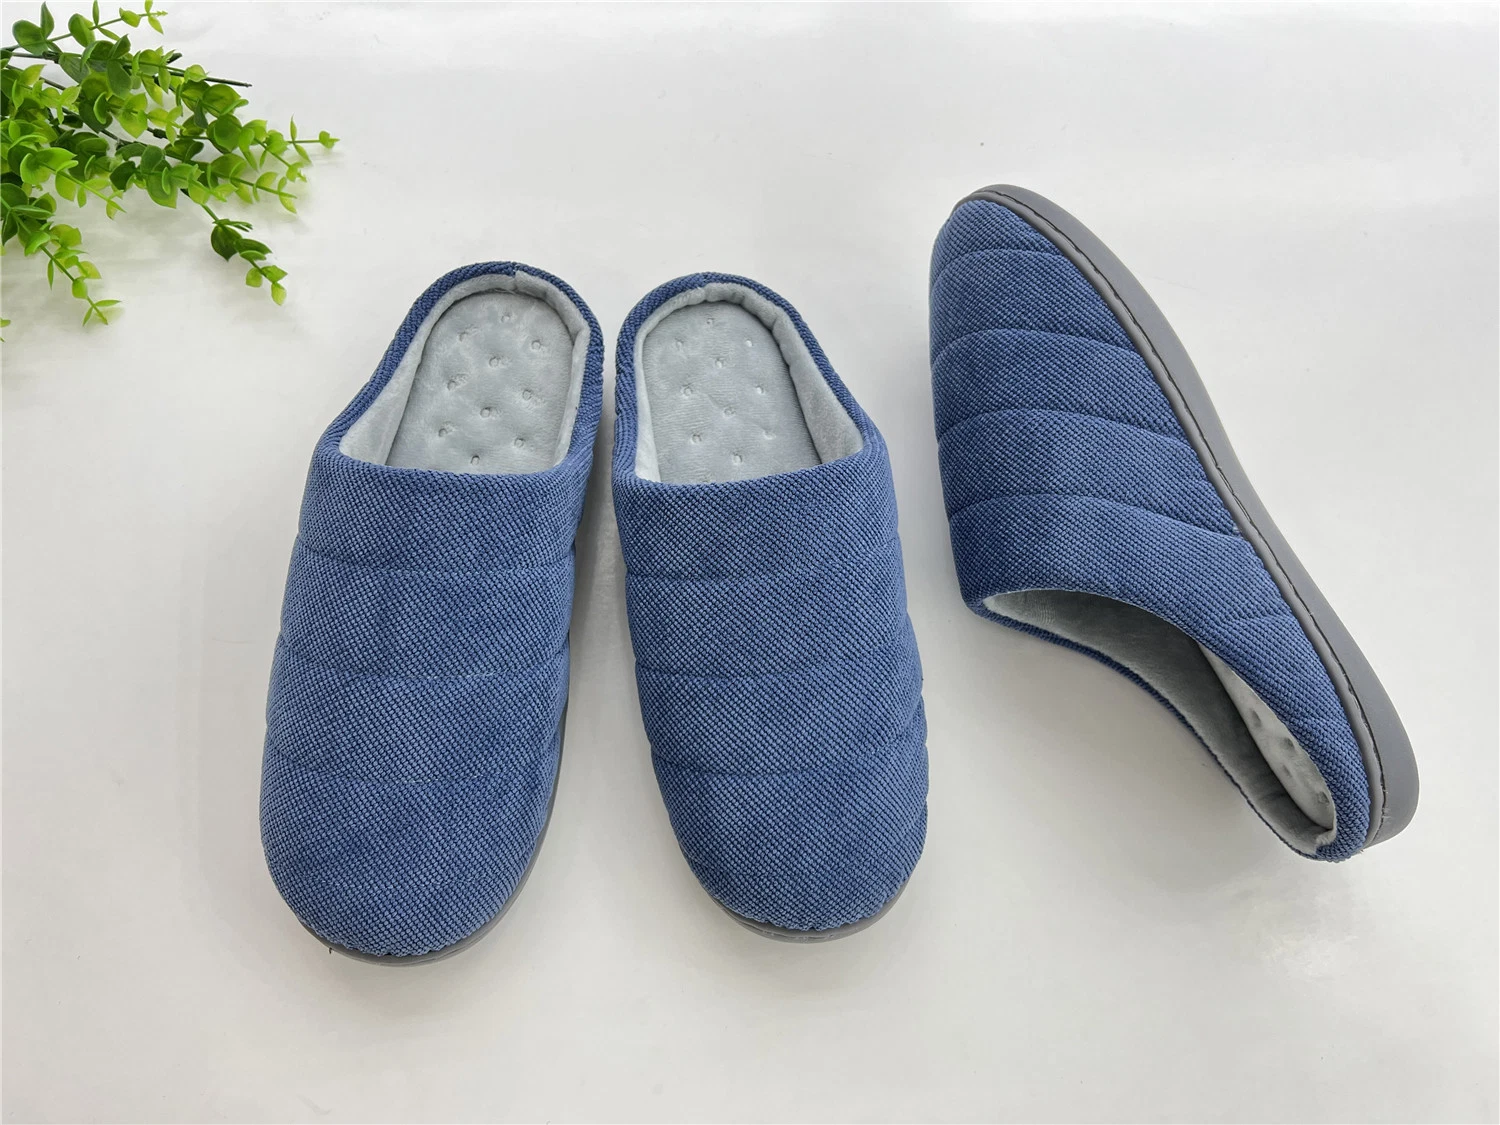 Factory Price Slipper for Men Fashion Fluffy Winter Warm Slippers Female Cartoon House Thick Bottom Slides Funny Shoes 40/41--44/45